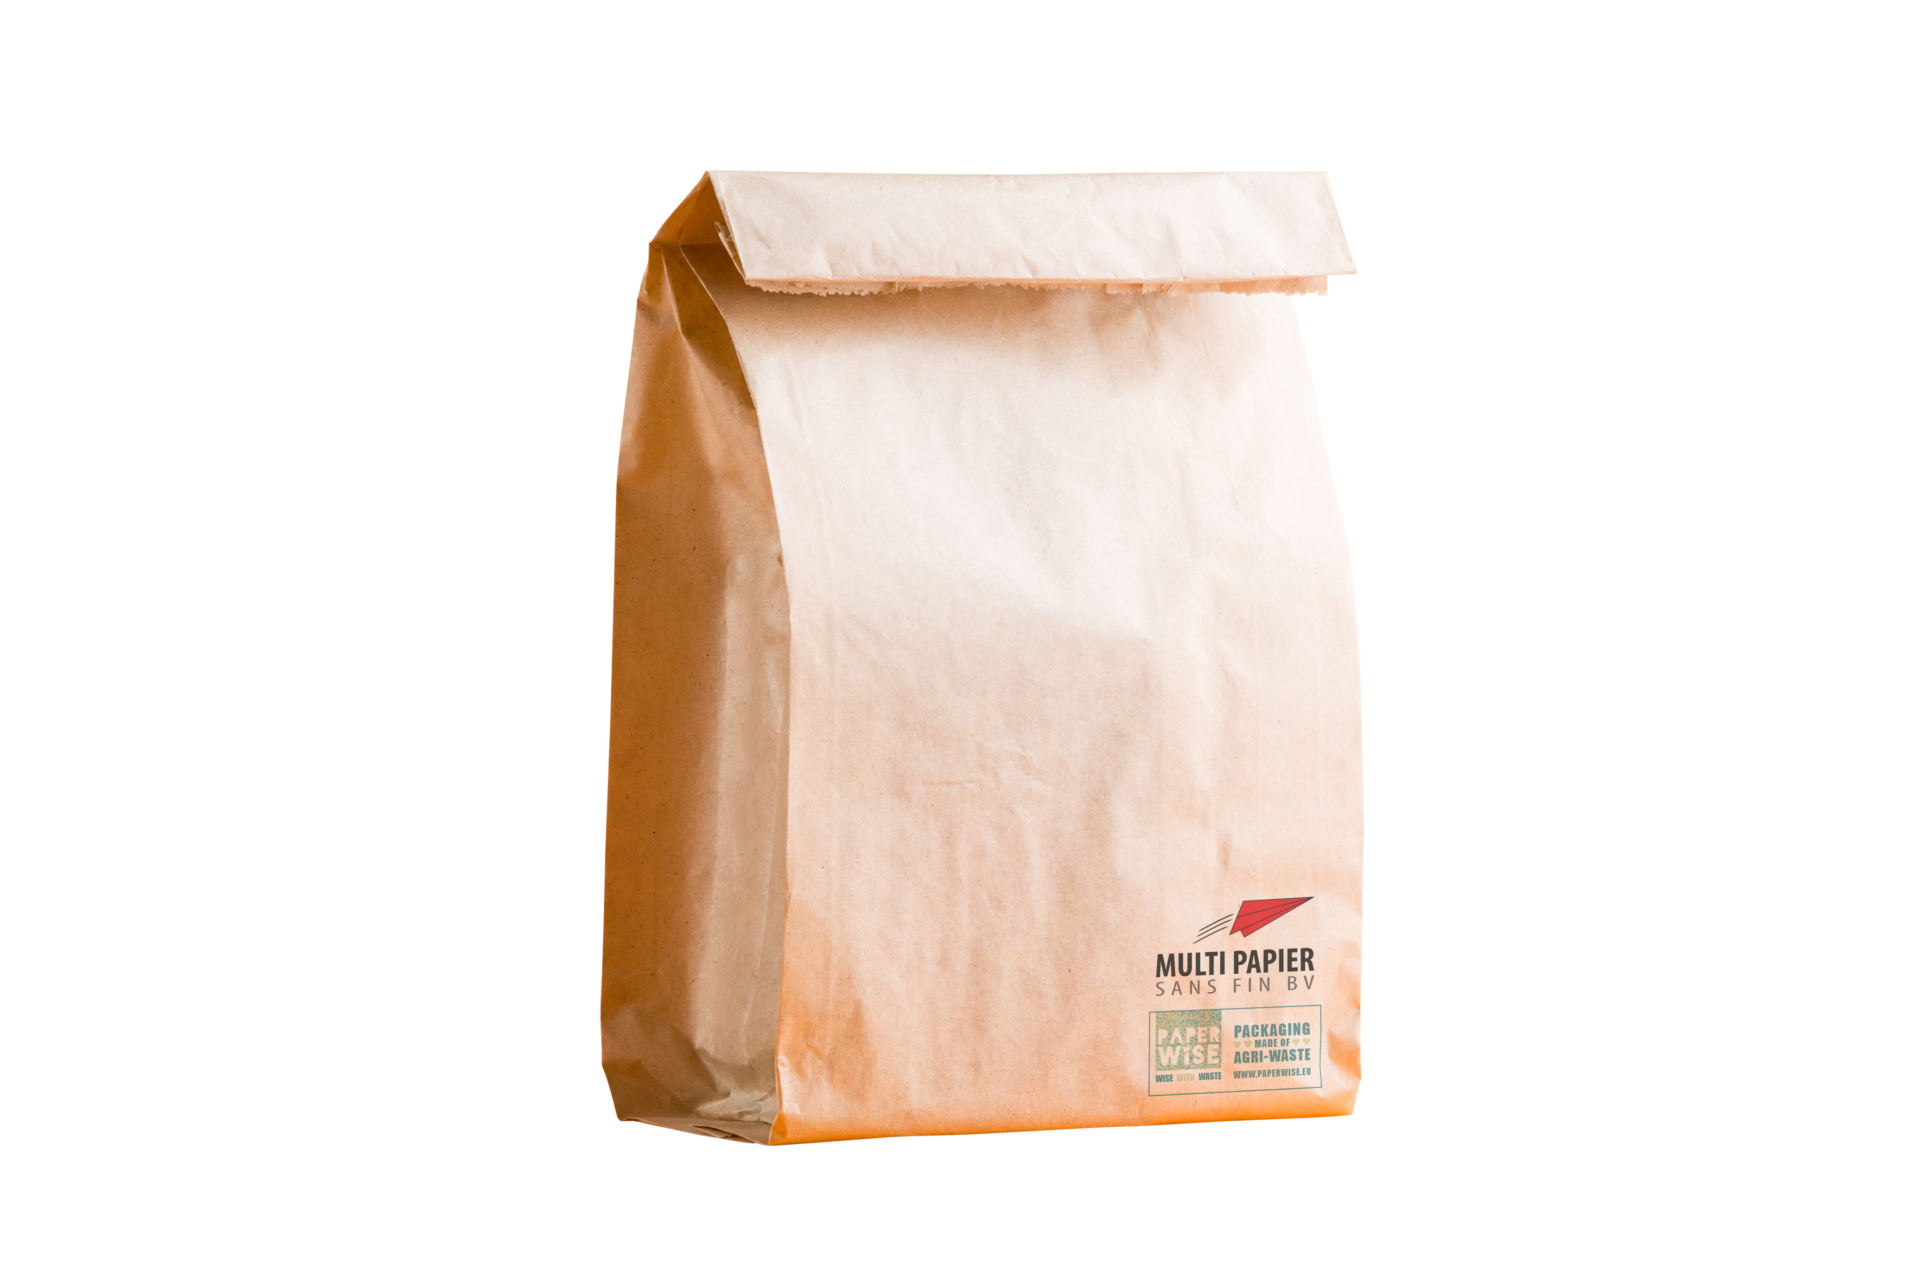 wp content uploads  0   0   eco friendly paper bread bag natural windowbag compostable recycable packaging multipapiersansfin  c